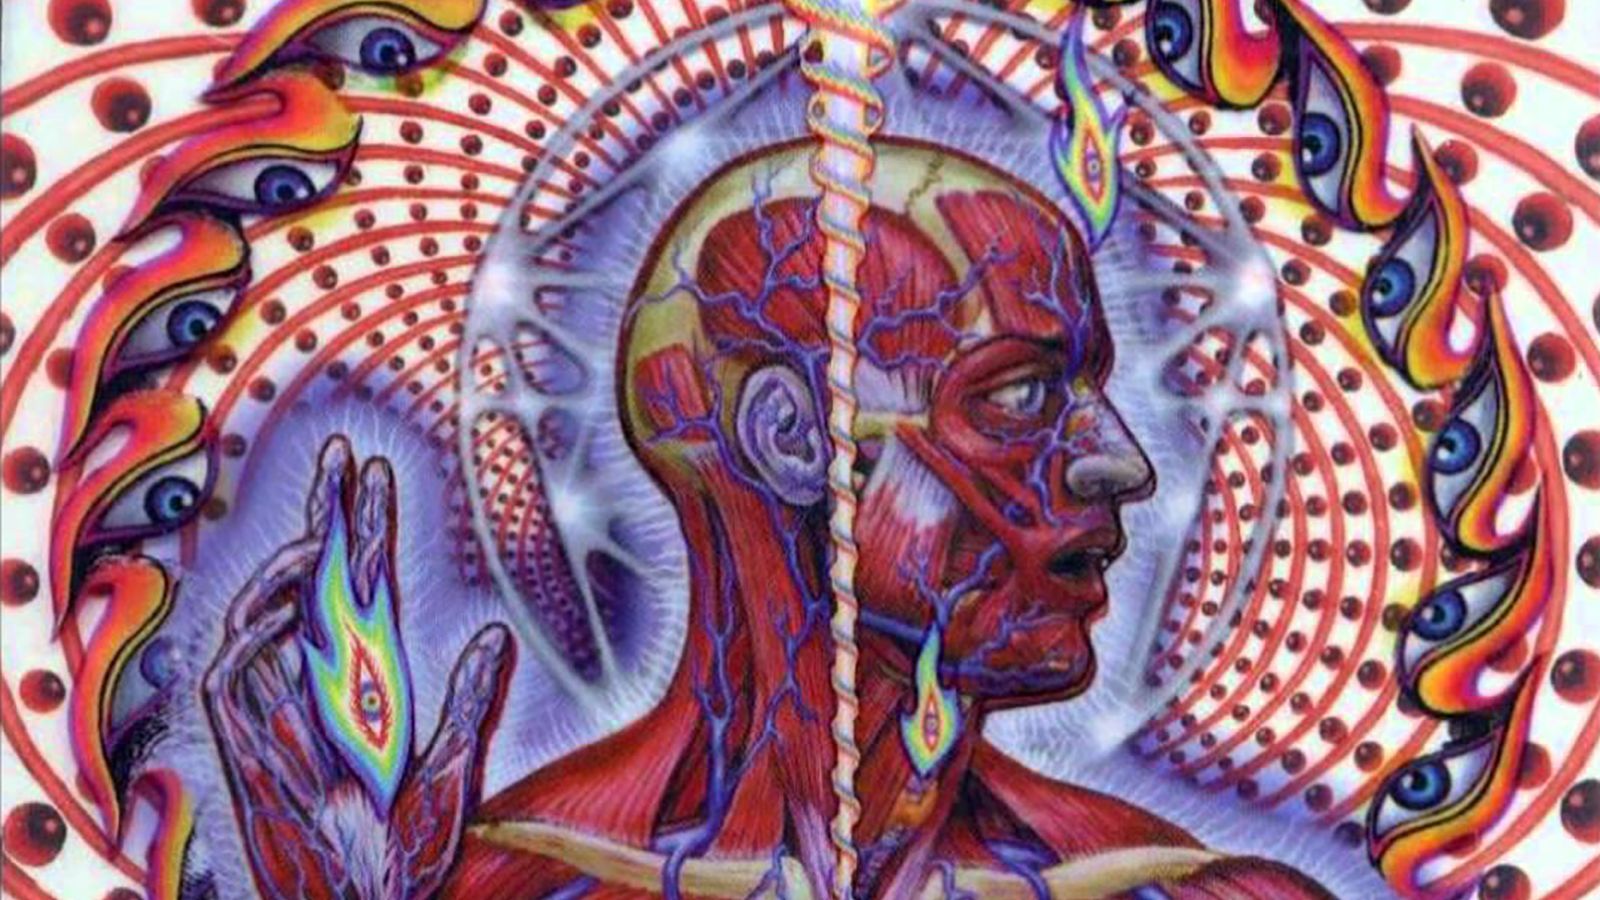 Things You Didn't Know About Tool's 'Lateralus'